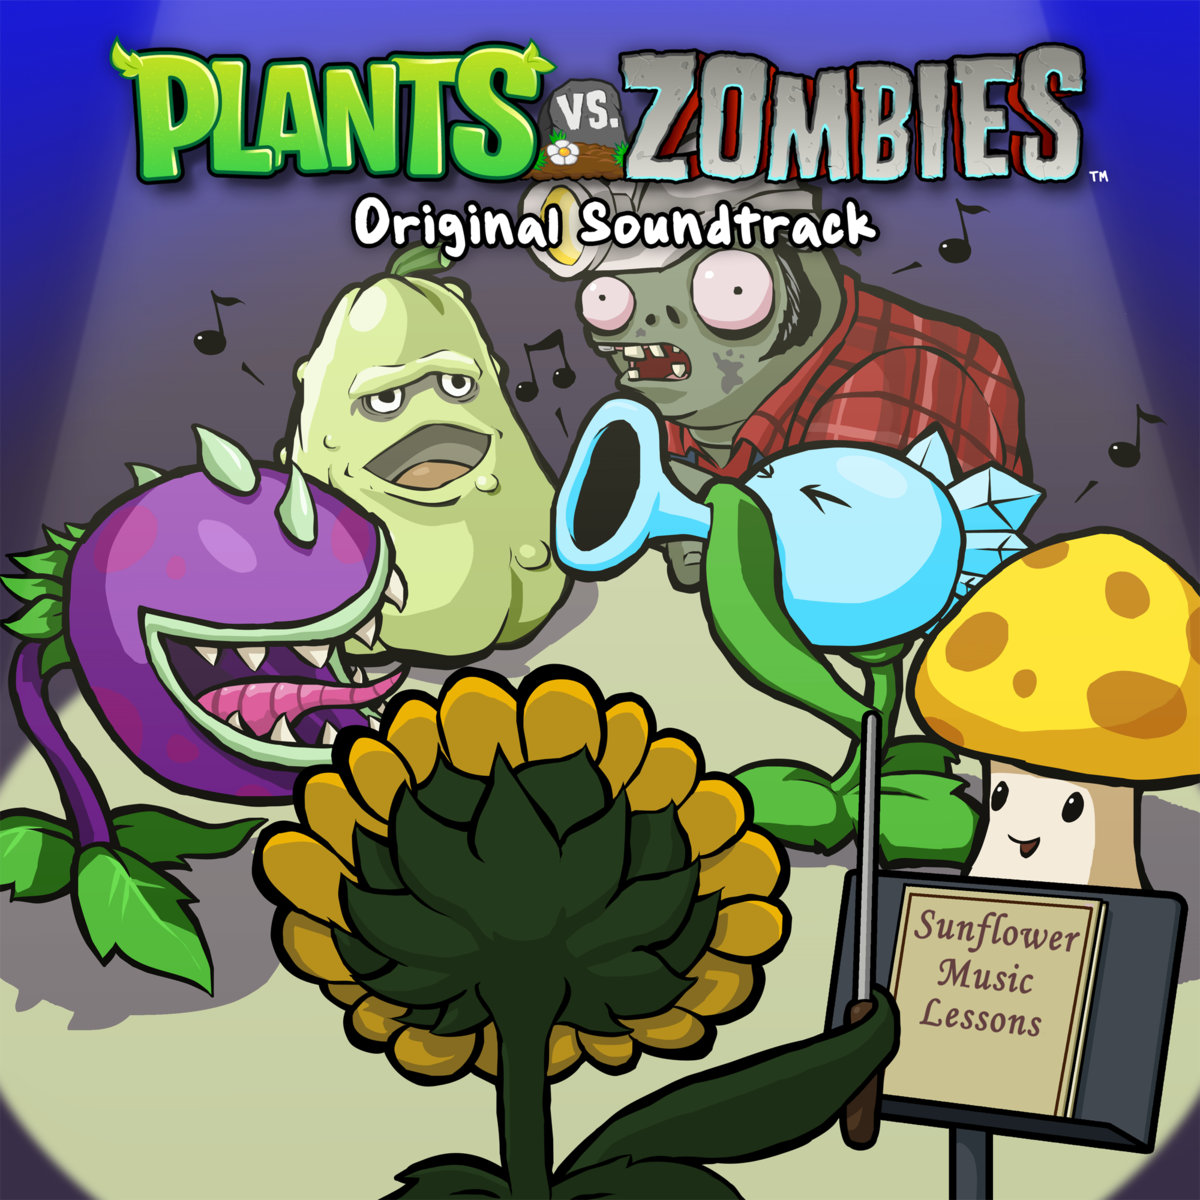 Plants vs zombies 2 free download full version without bluestacks